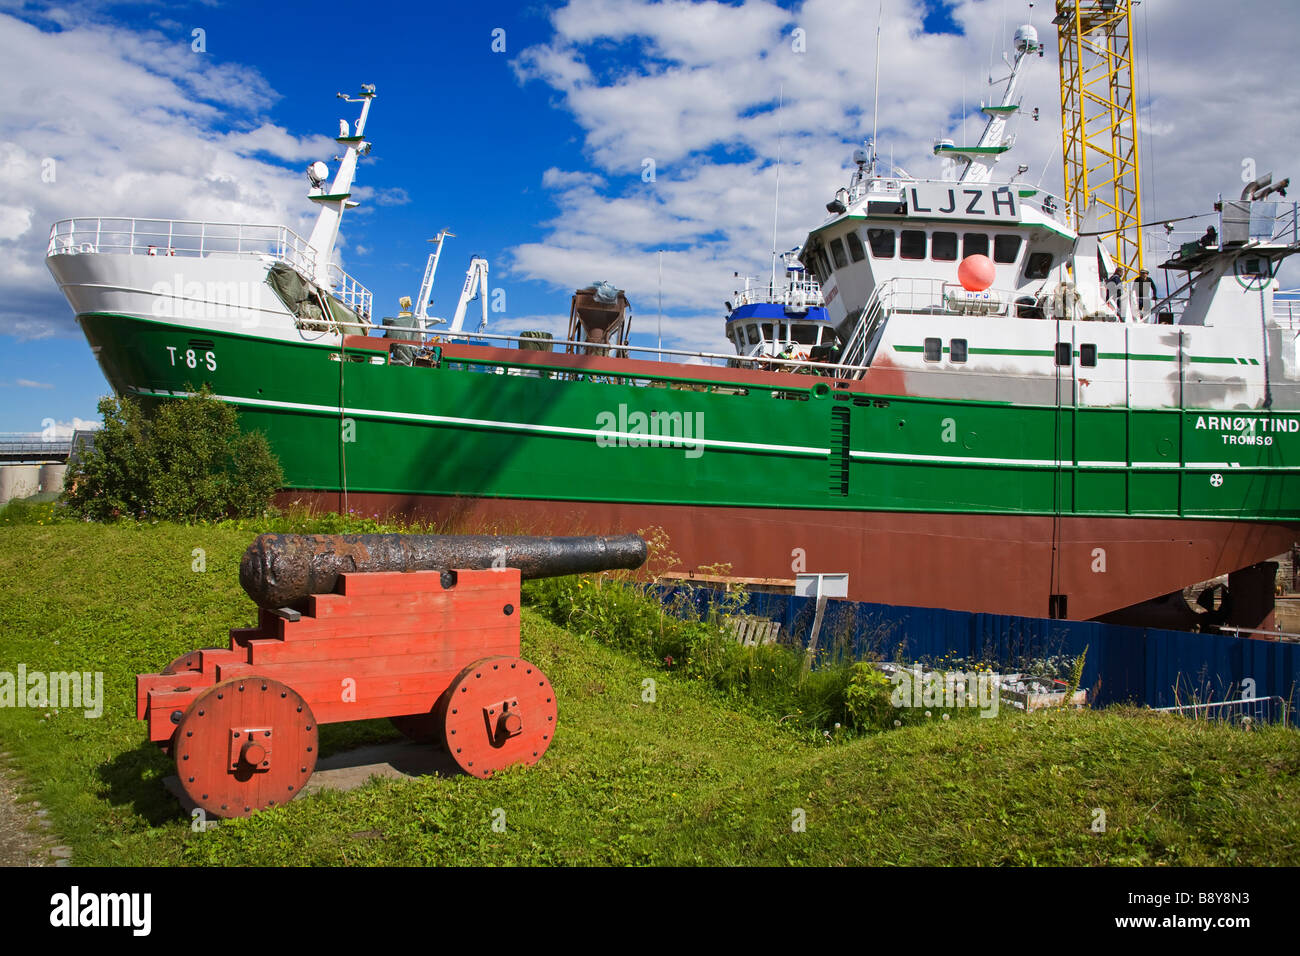 Commercial fishing boat at a dry dock, Skansen, Tromso, Toms County, Nord-Norge, Norway Stock Photo